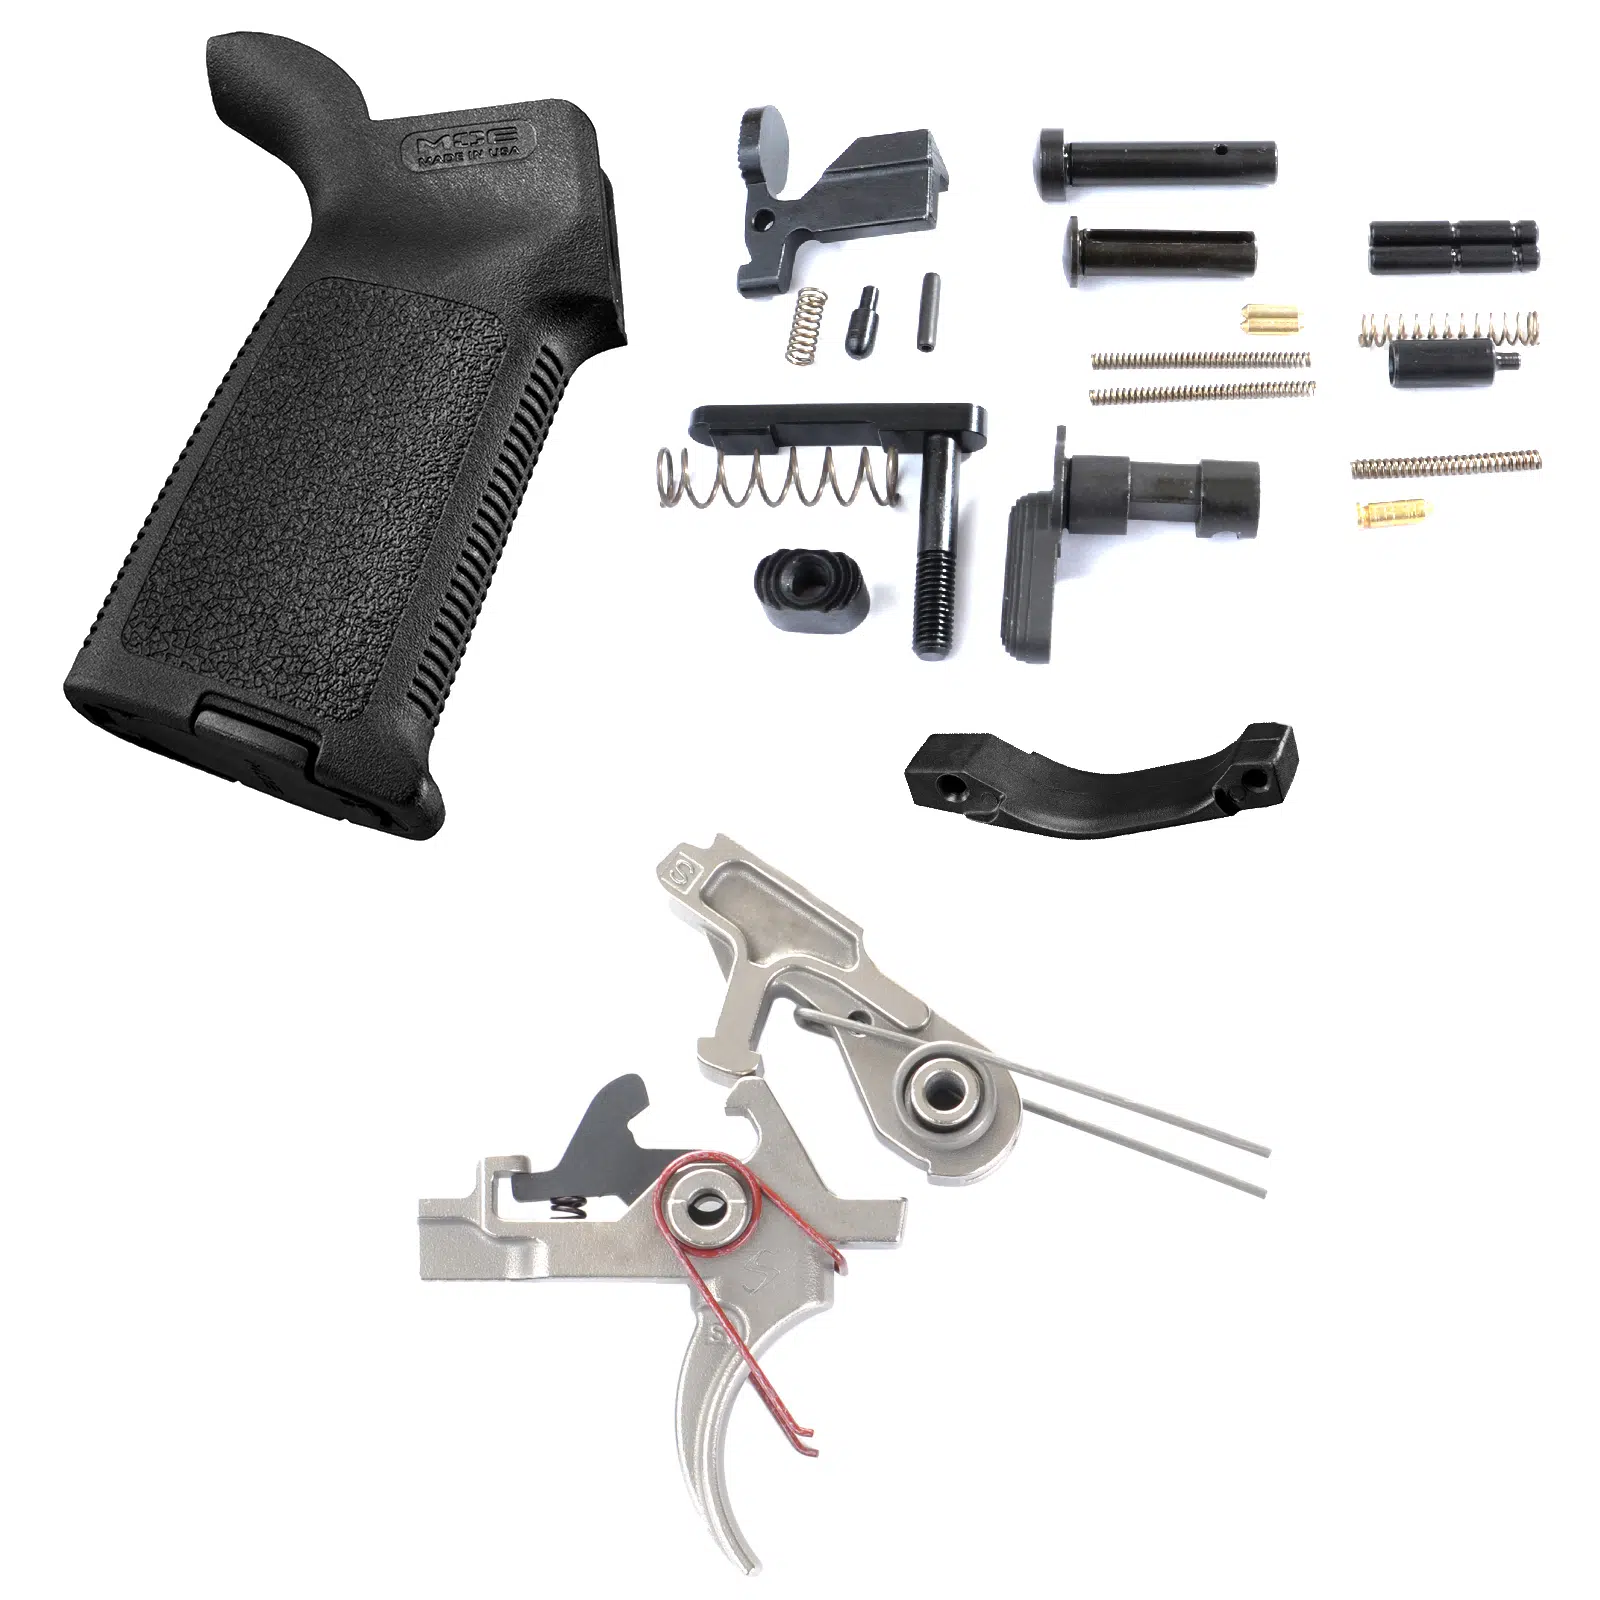 AT3™ AR-15 2-Stage Lower Parts Kit with Nickel Boron Trigger and Magpul MOE Grip